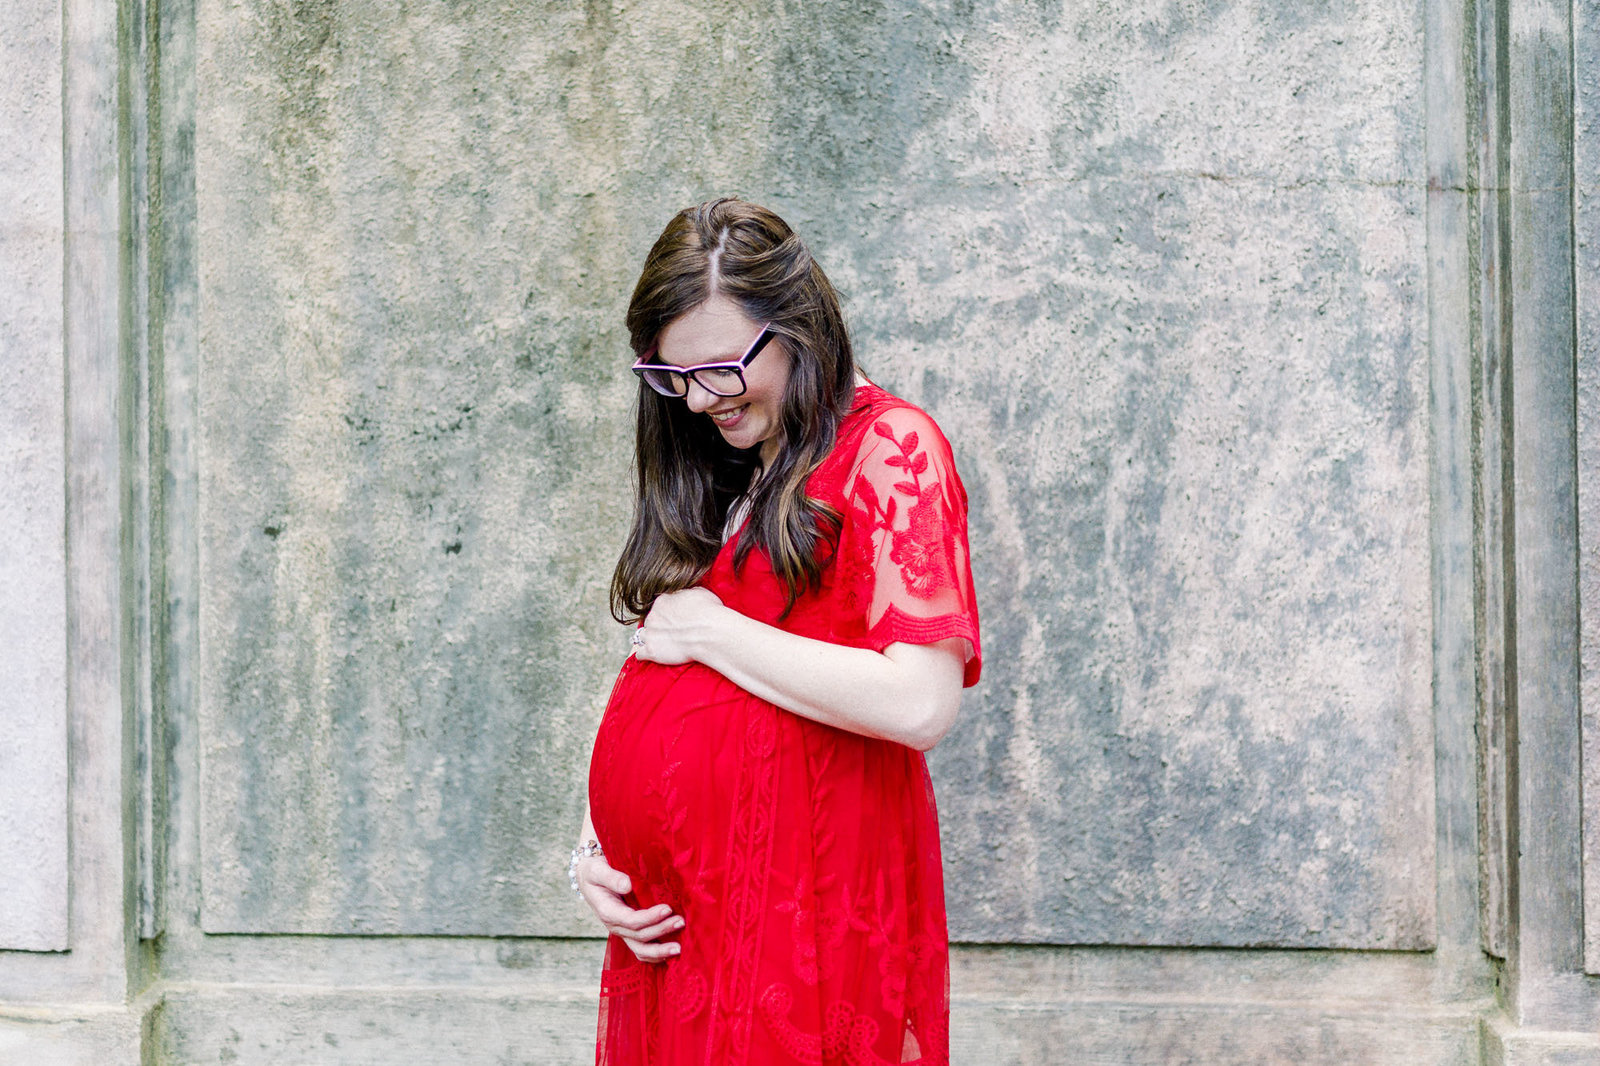 Mom-to-be captured by Staci Addison Photography